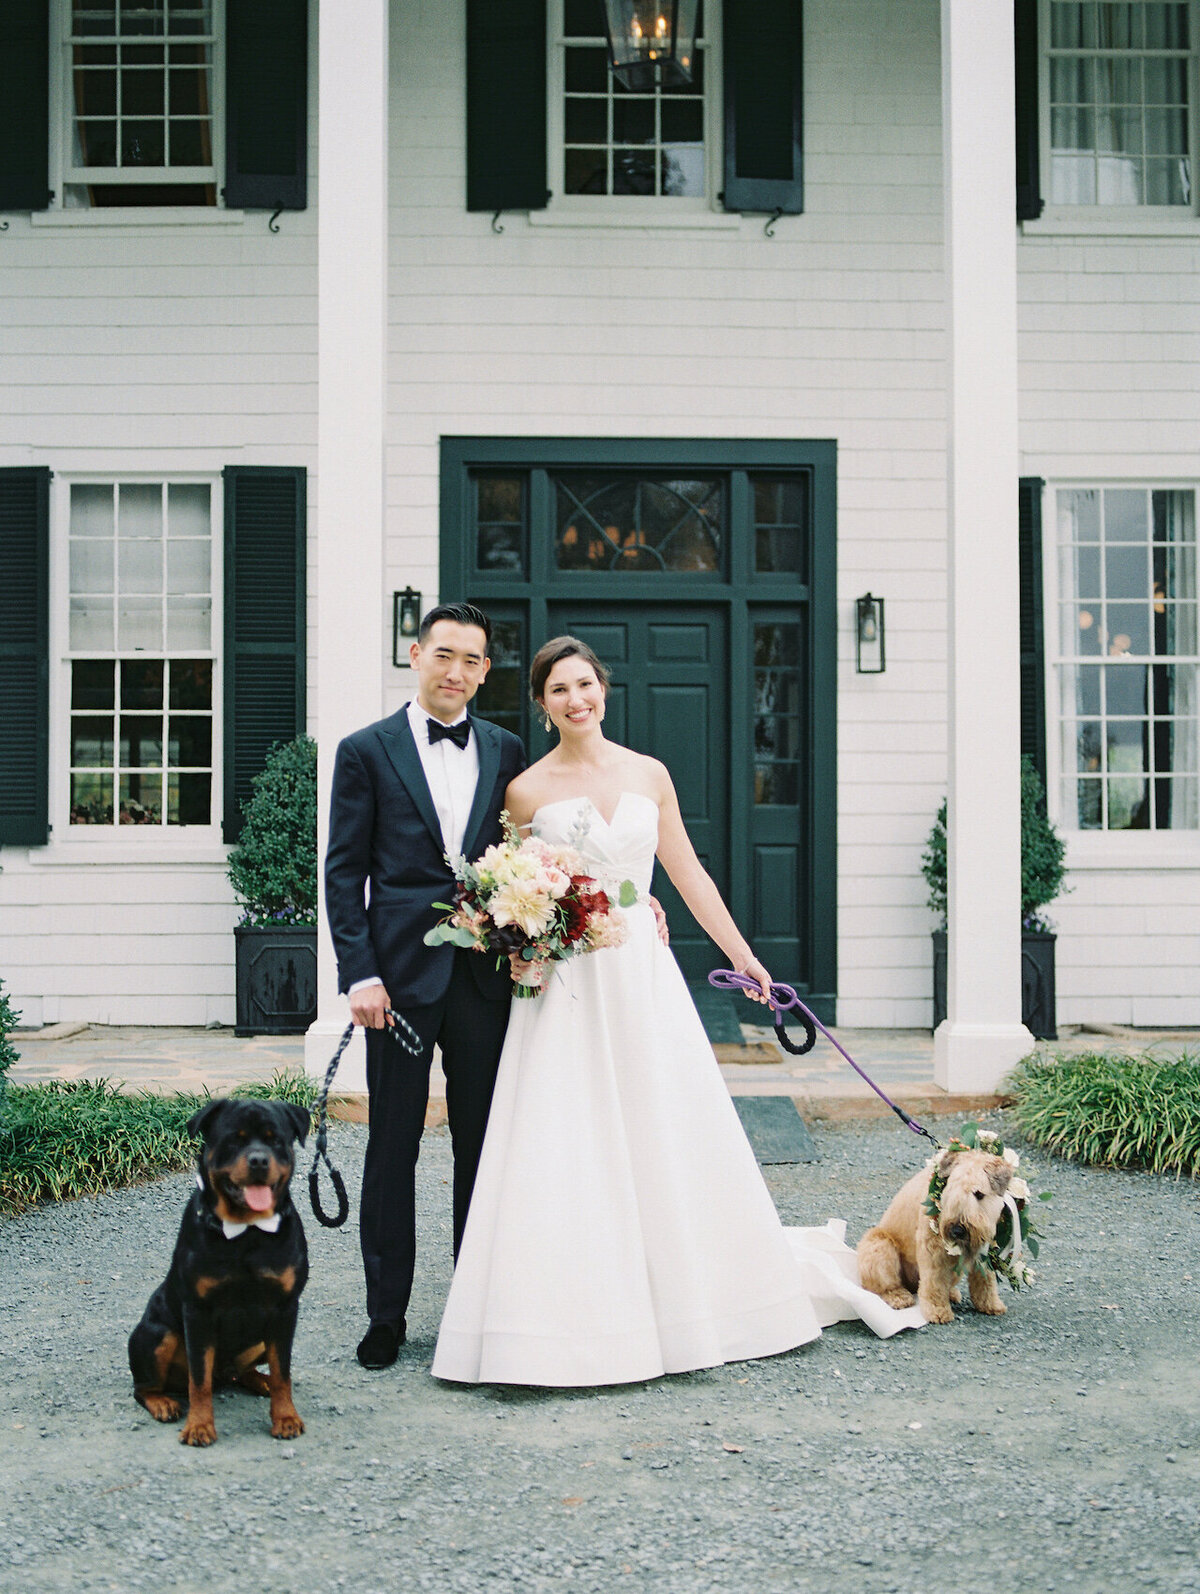 Bride and Groom Portraits with Dogs Robert Aveau for © Bonnie Sen Photography